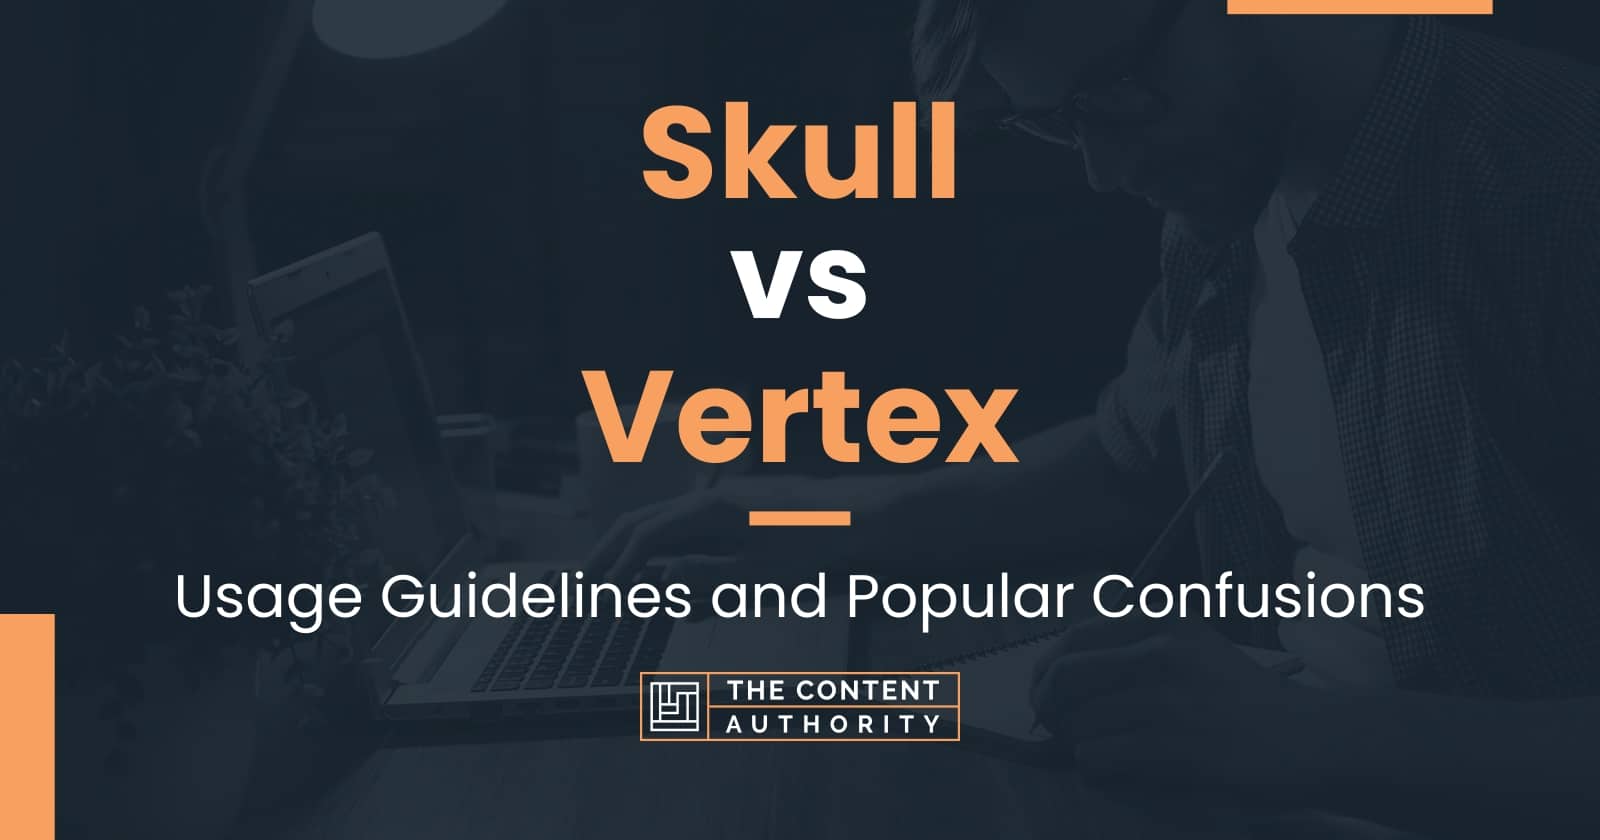 Skull vs Vertex: Usage Guidelines and Popular Confusions